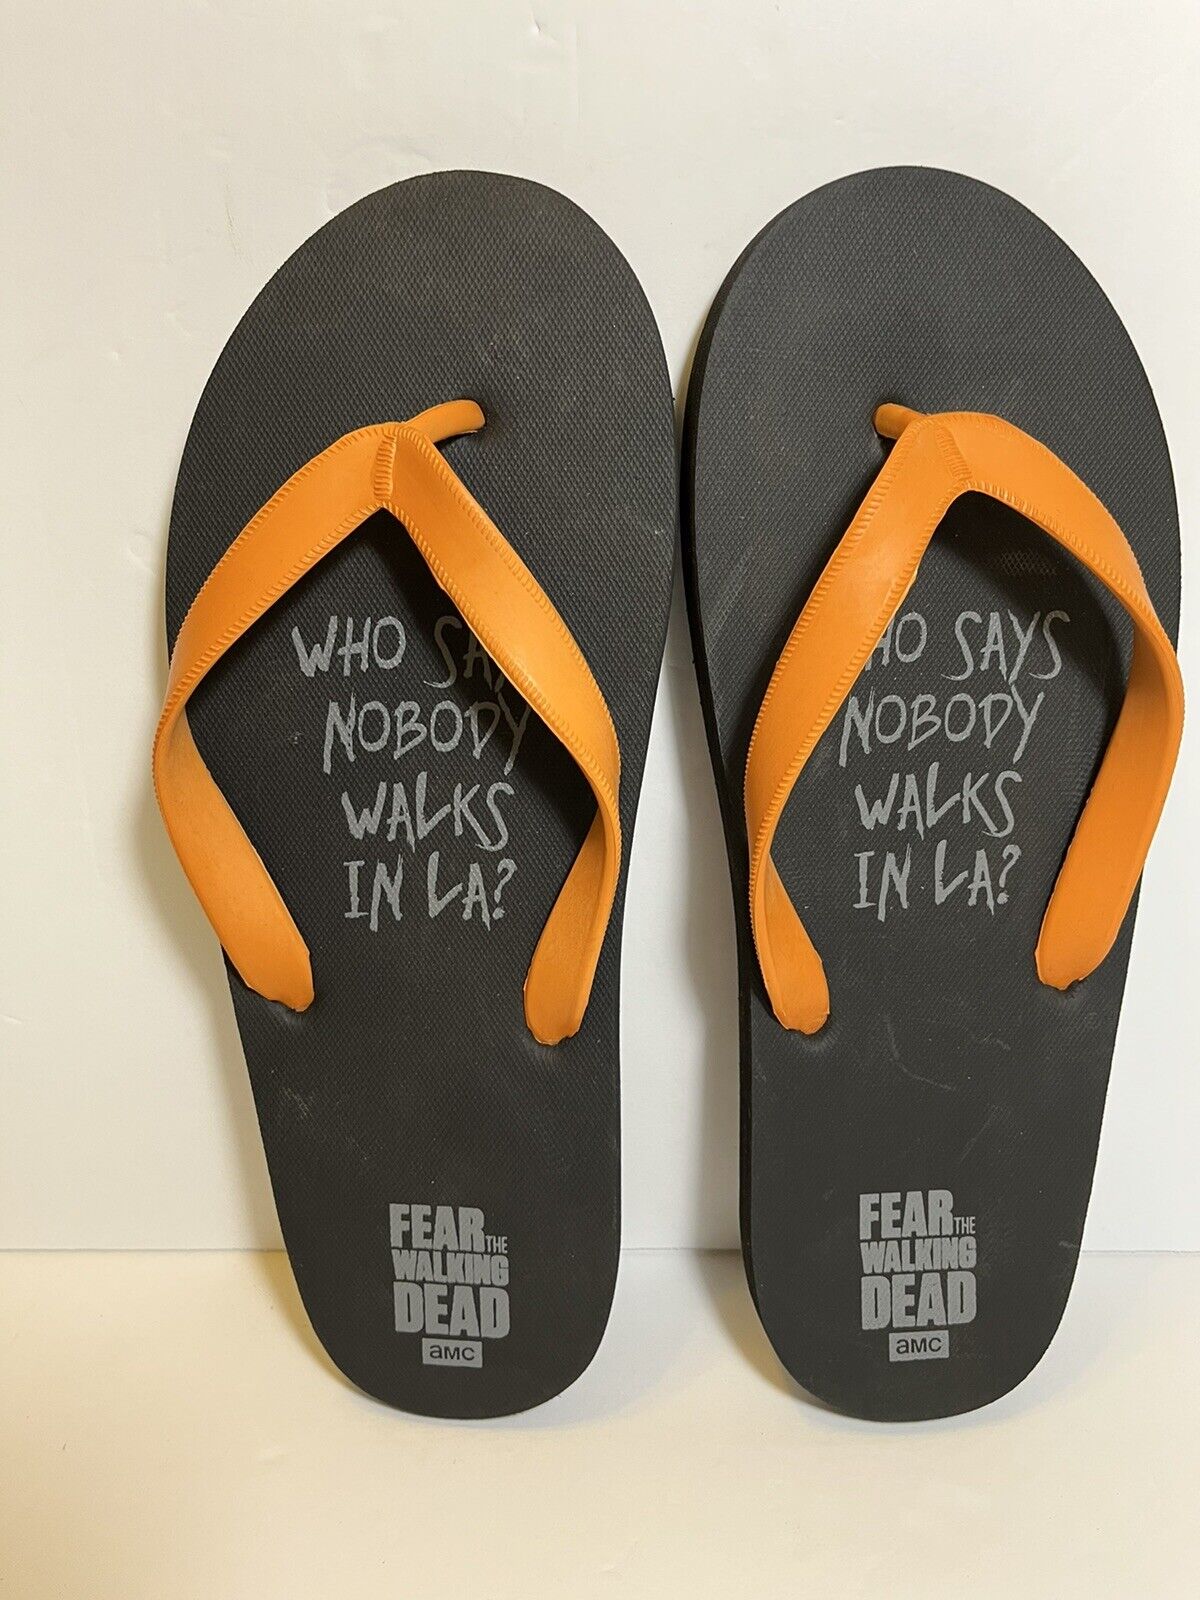 FEAR OF THE WALKING DEAD Official AMC Promo Sandals - NEW